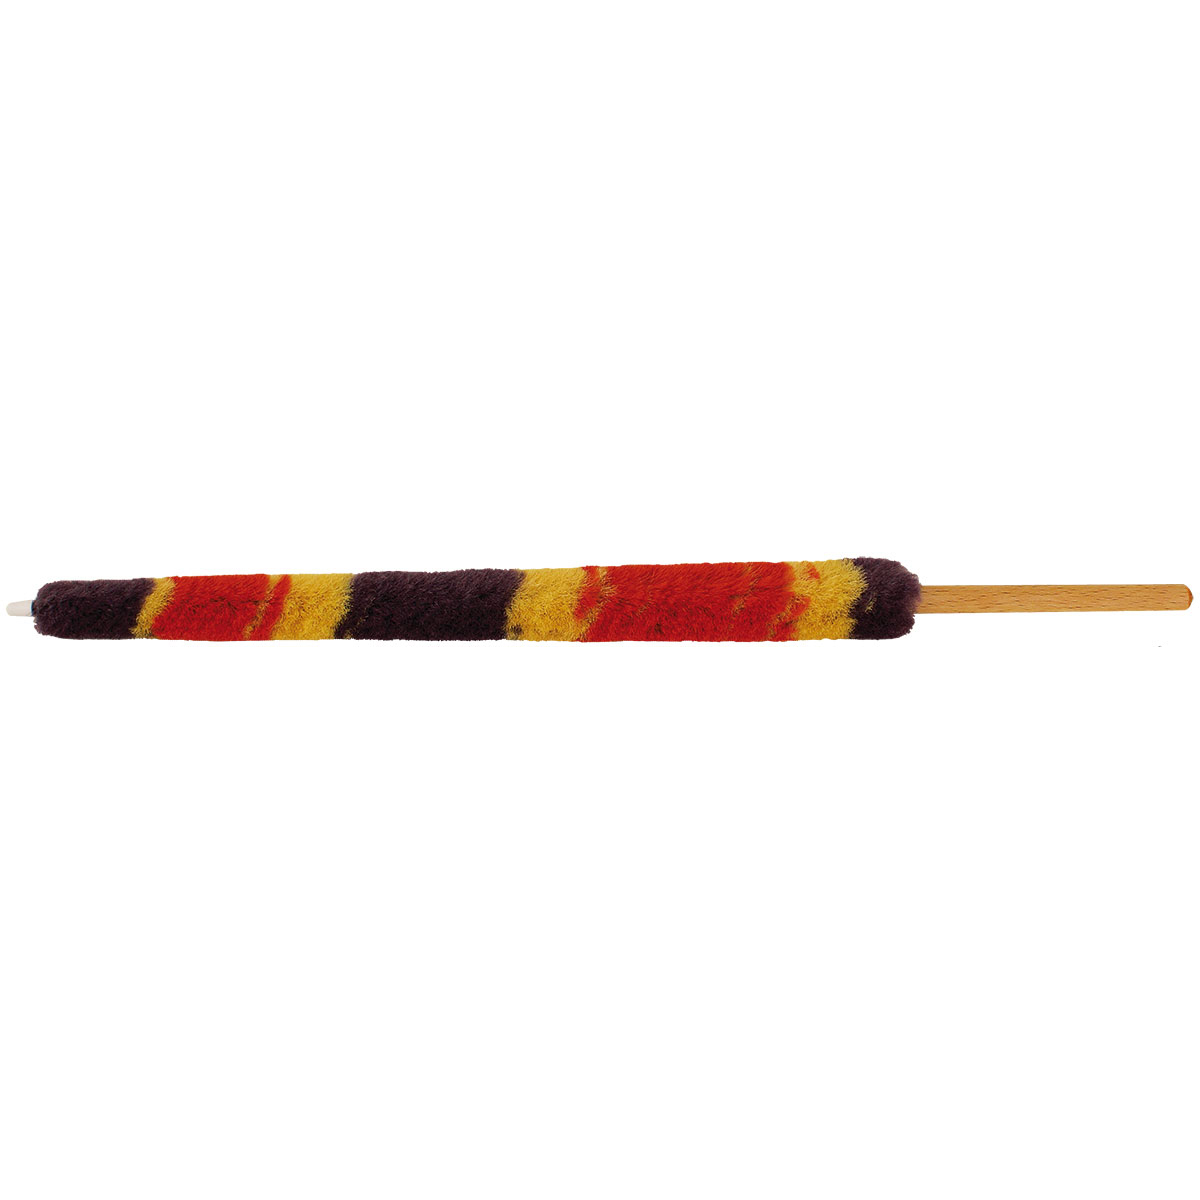 Helin Flute Cleaning Mop. Wool with Wooden Handle